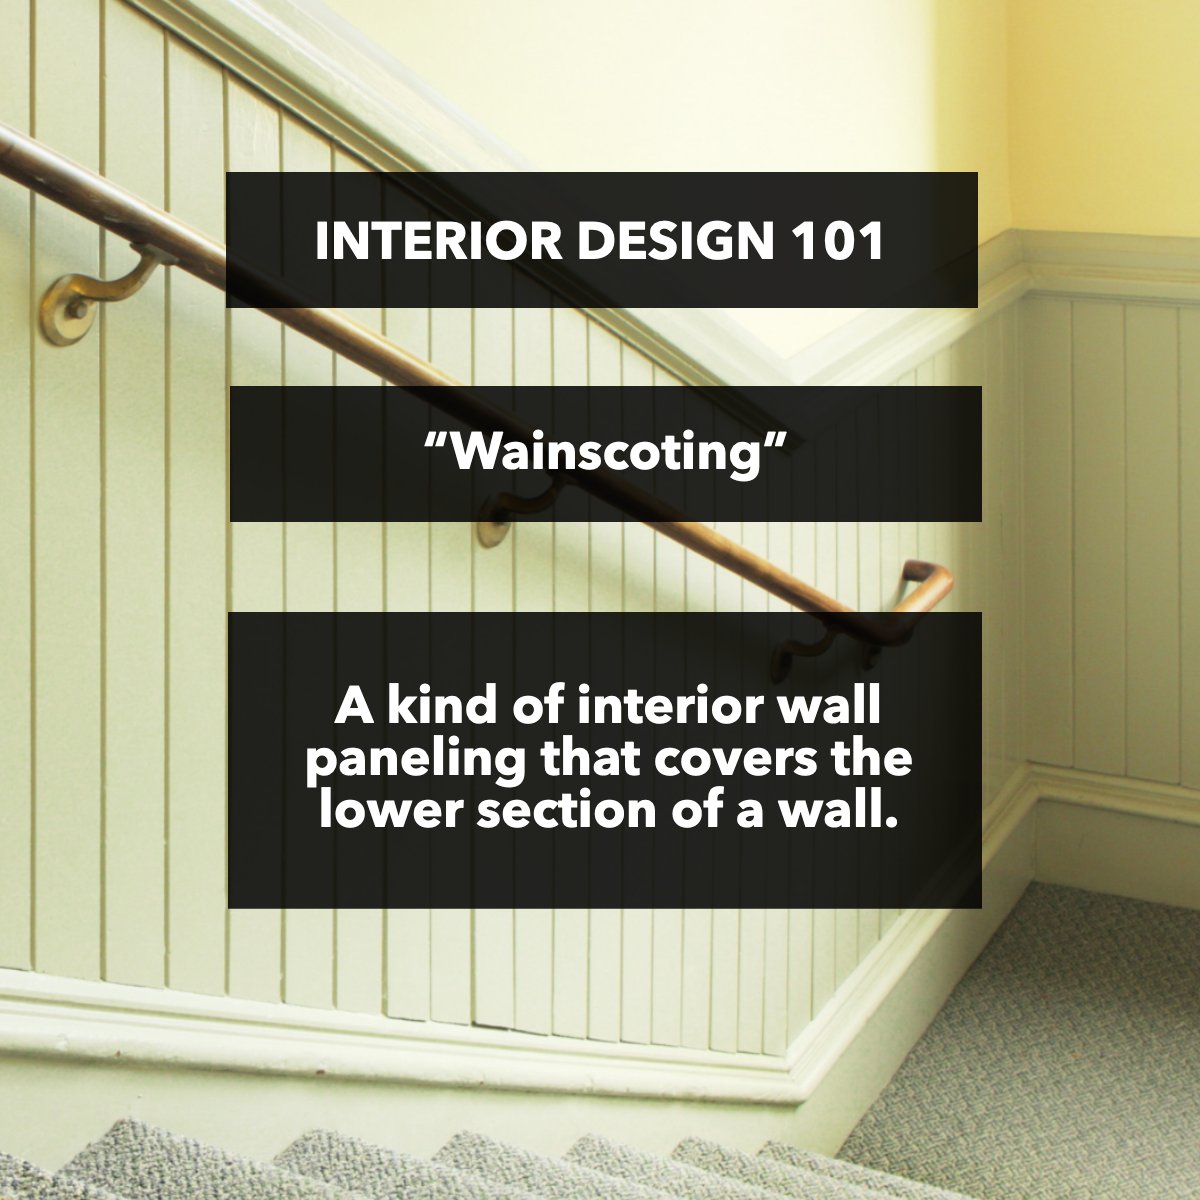 Have you ever heard the term wainscoting? 

✨ The more you know 

#interiorsdesign  #interiortrends  #interiordesigning  #interiordesigntrends  #interiorsaddict
#Social #Realtor #Posts #calcoastagent #centralcoast #centralcoastrealtor #pismobeachrealtor